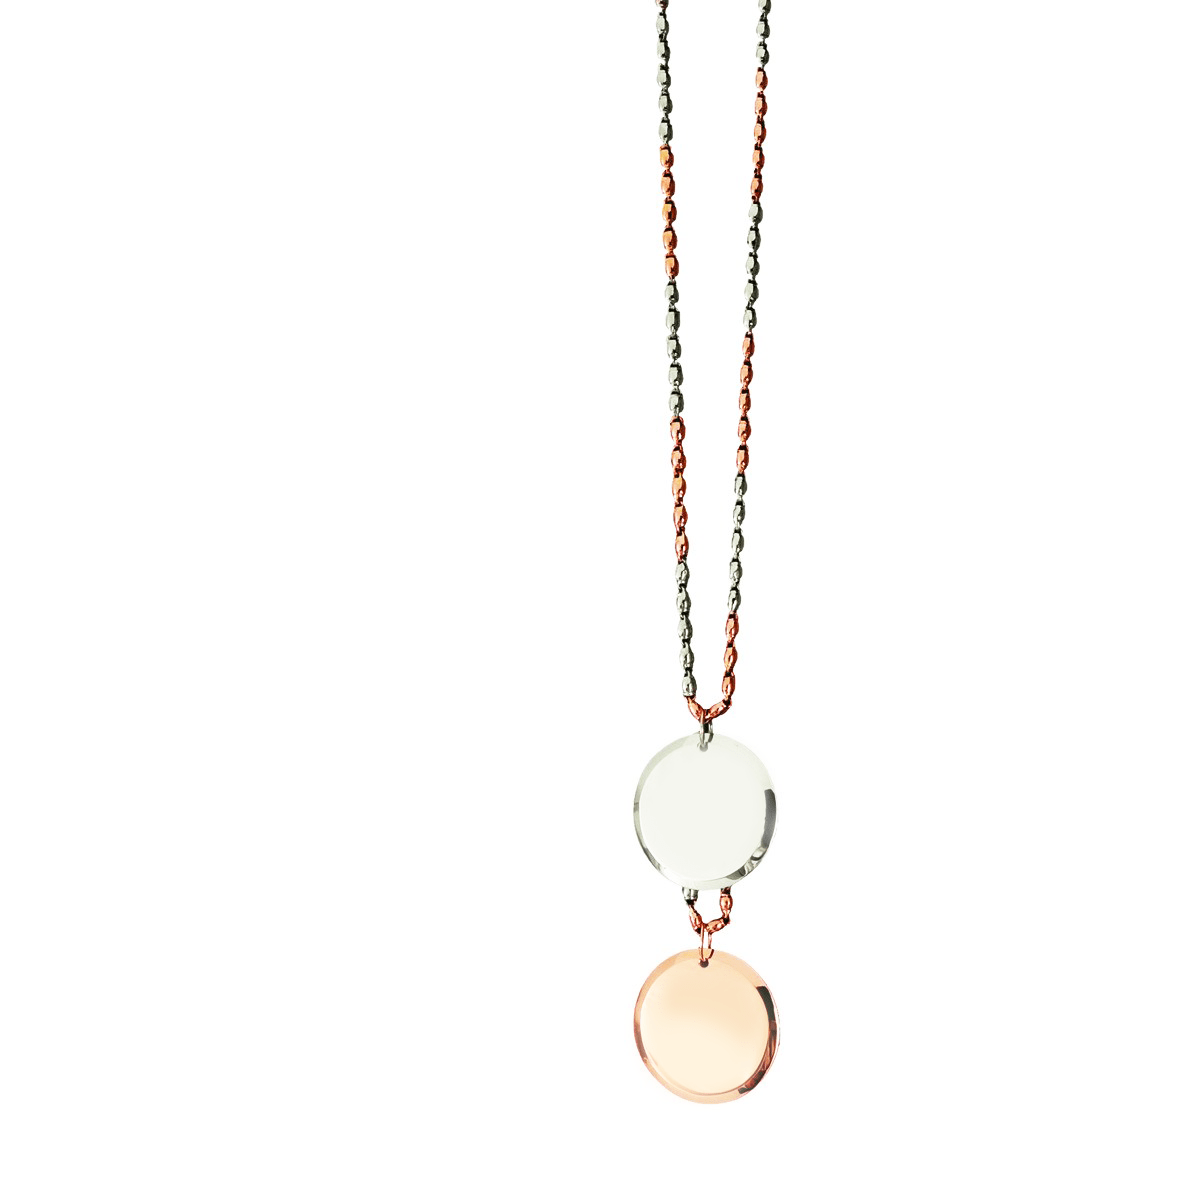 Gold Necklace - Aire Eternity Tag Necklace - 18-Karat White and Amber Hue Gold - RED GOLD®